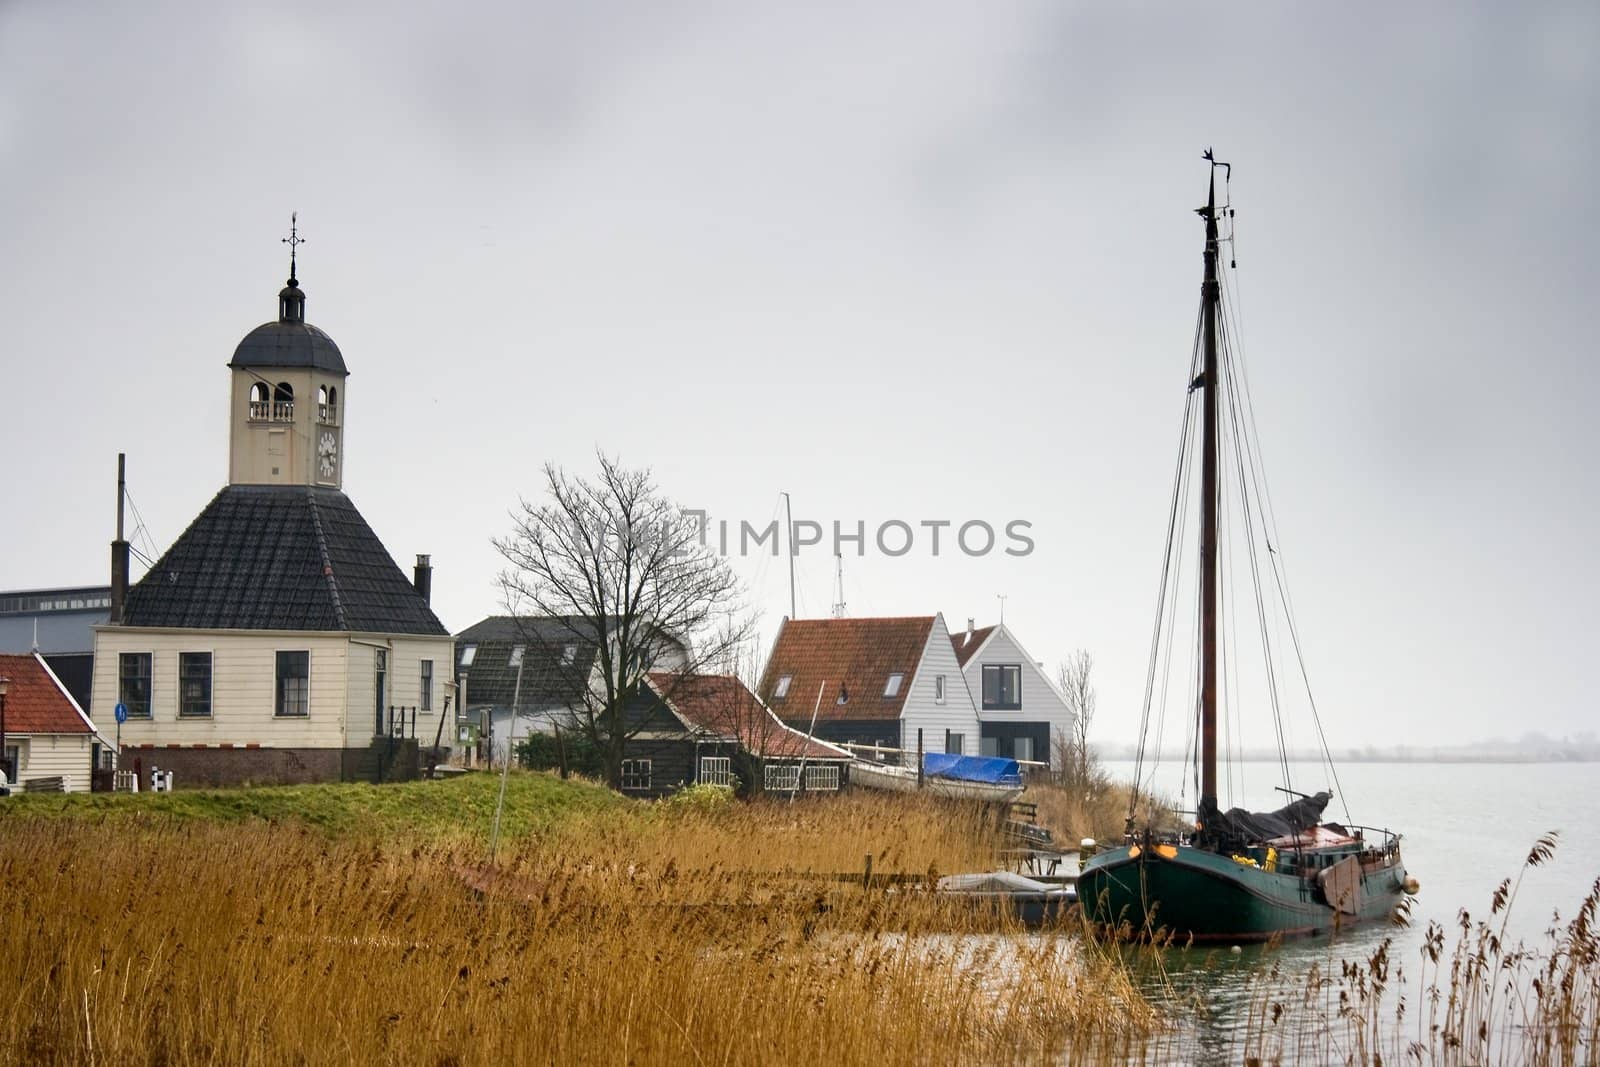 Fishing village and boat at the lake in winter by Colette